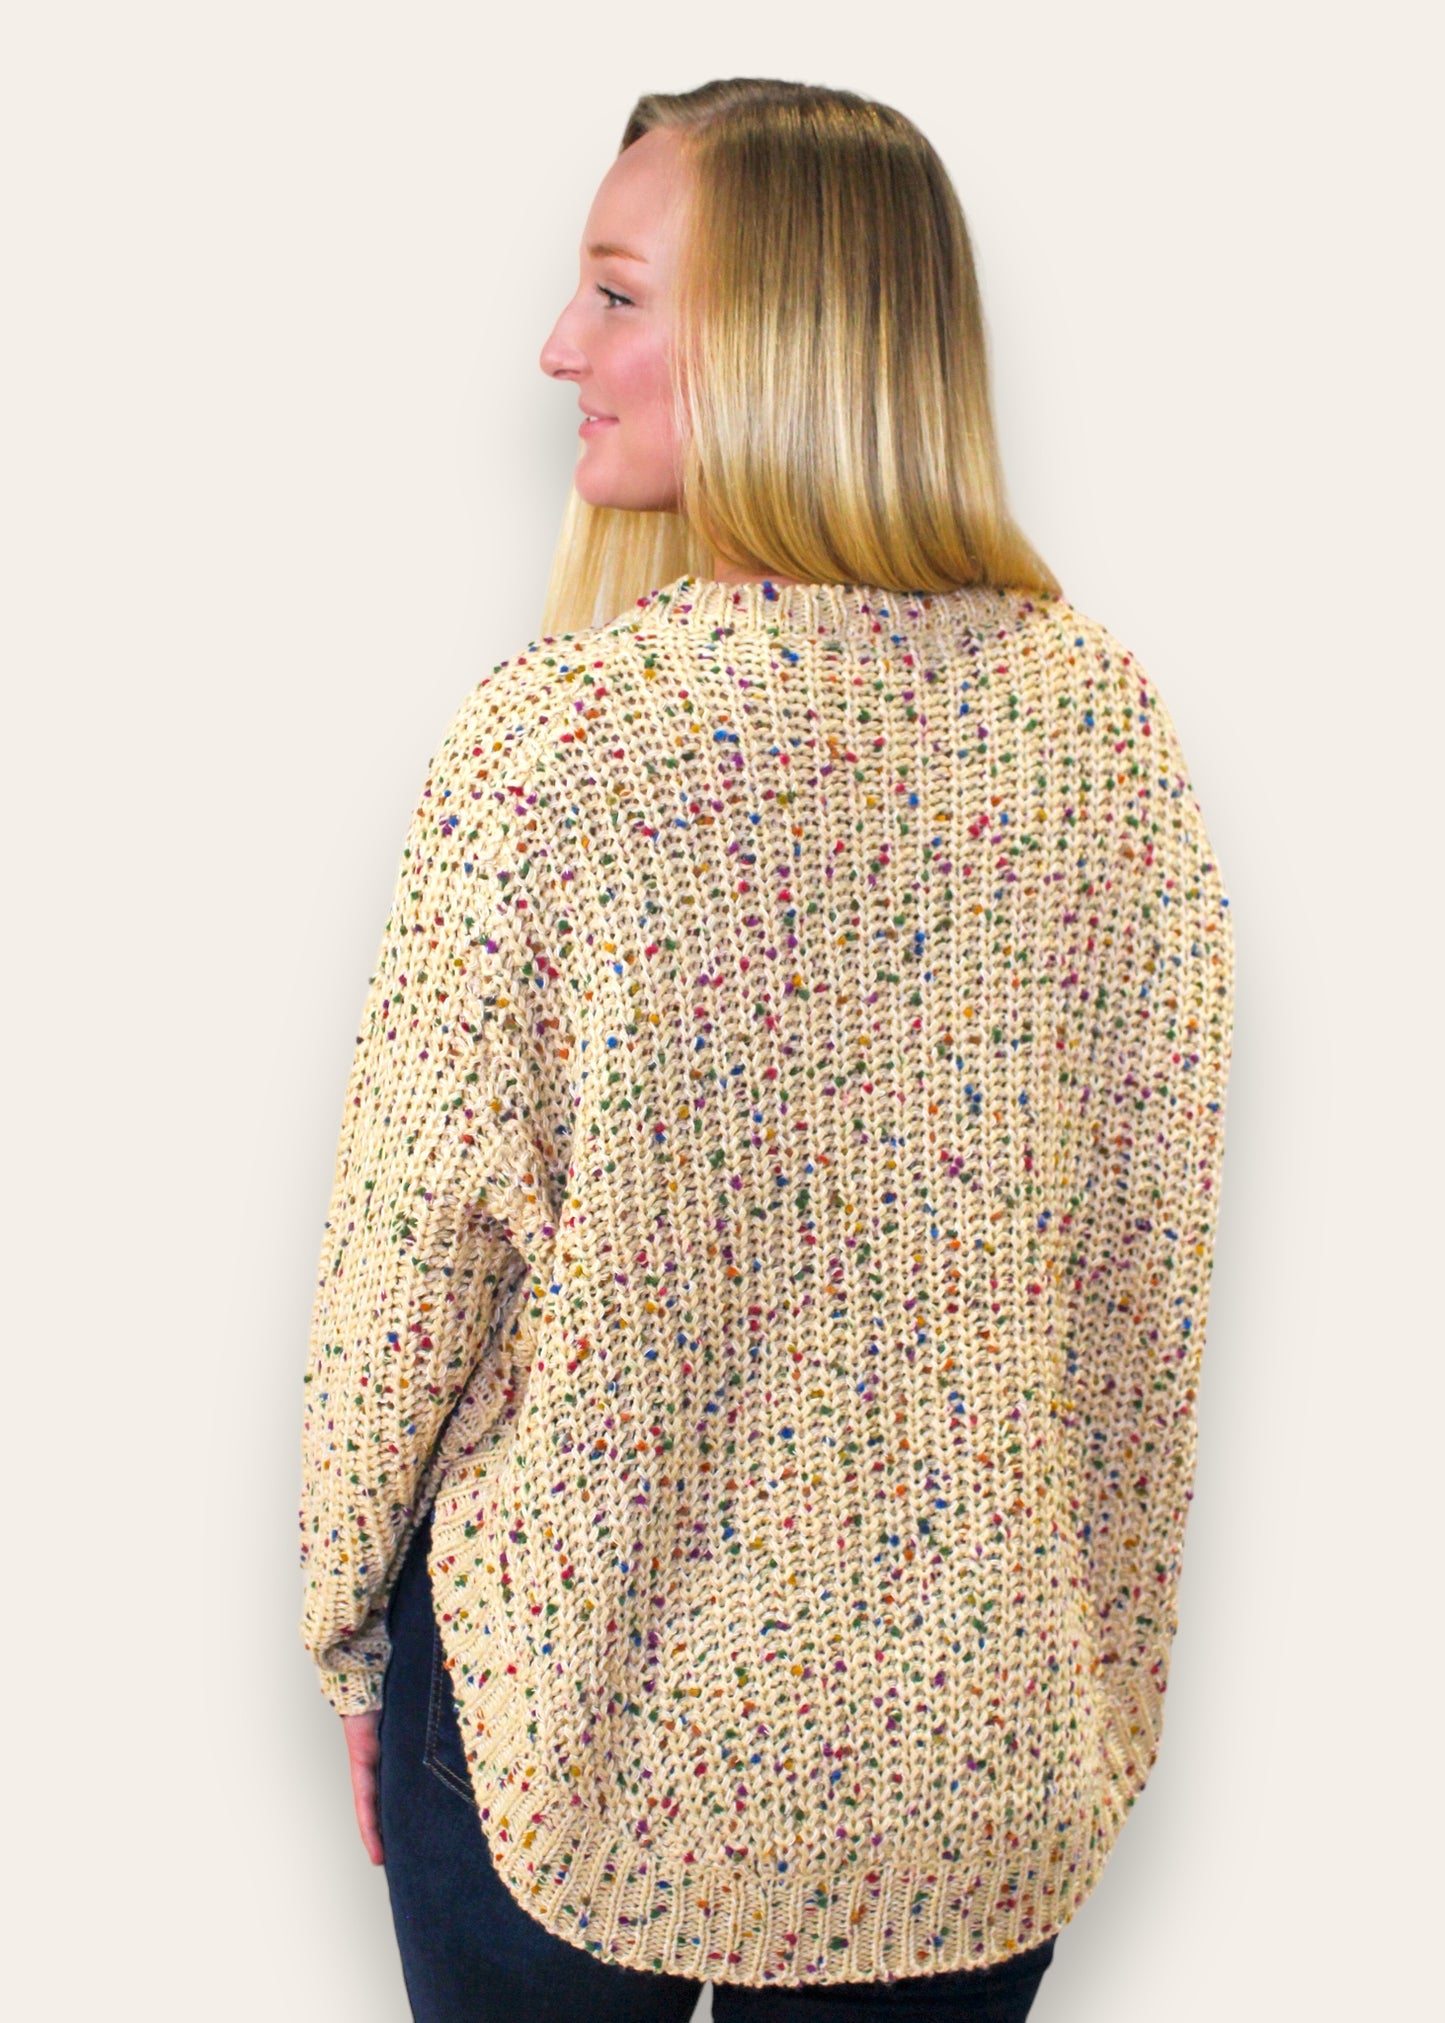 The Dot Waffle Weave Sweater. A back view.